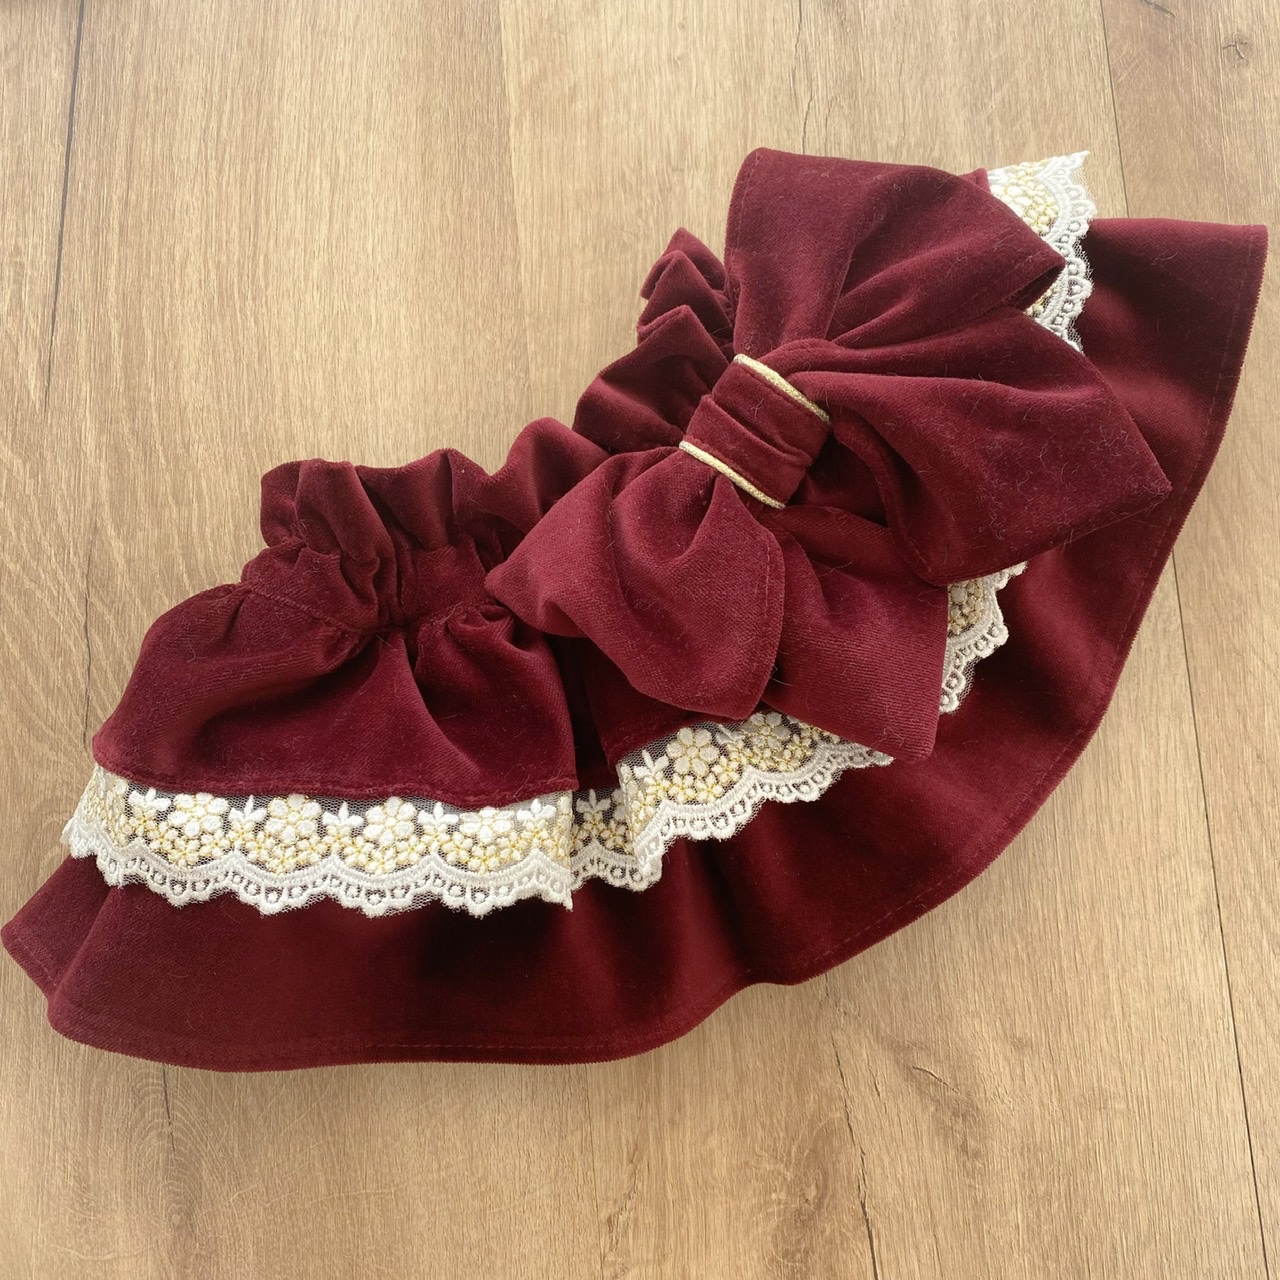 Diaper cover (Bloomers)